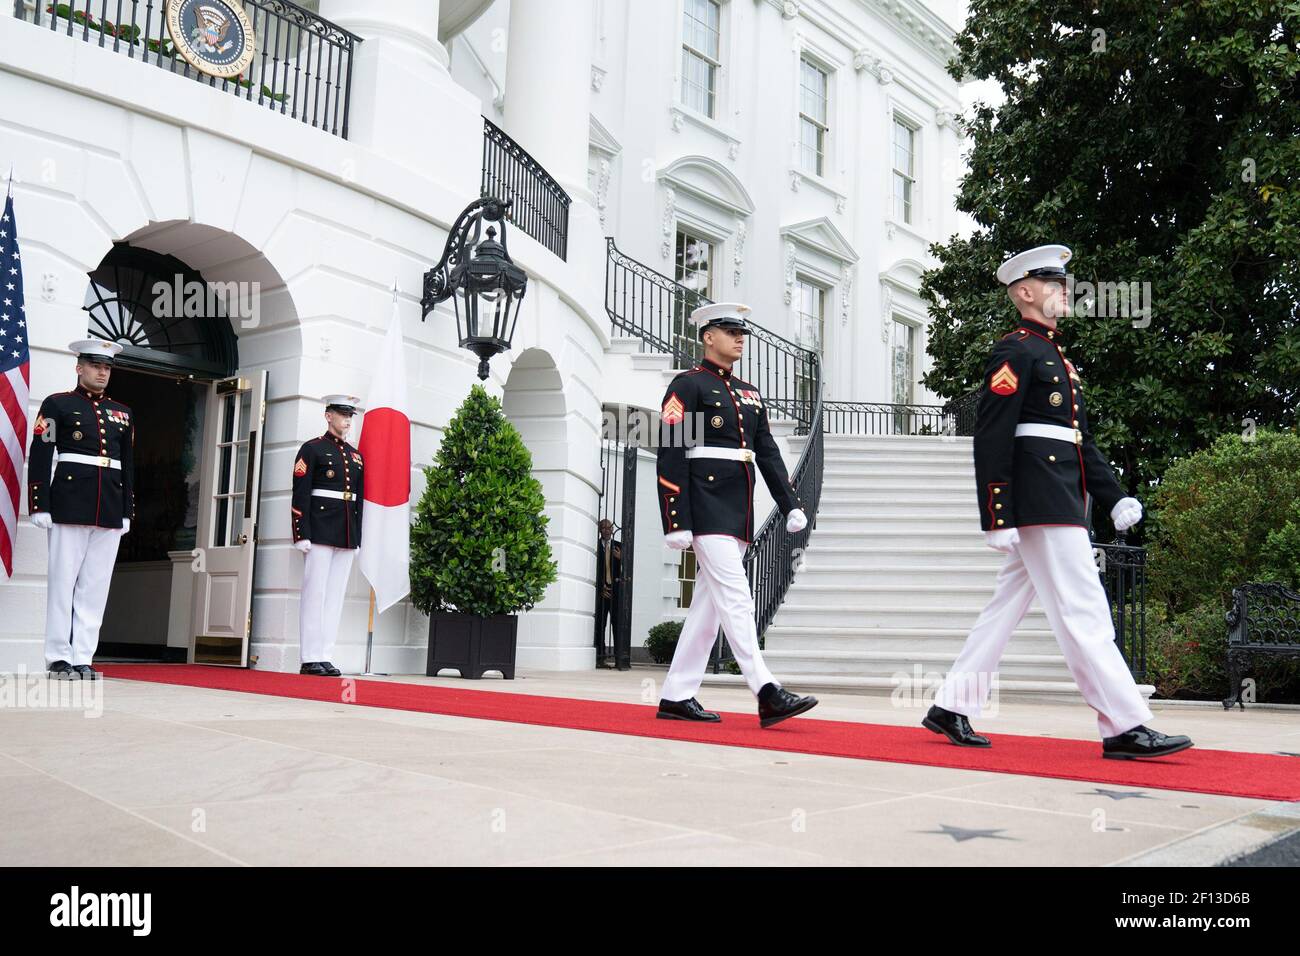 A U.S. Marine honor guard walks from the South Portico entrance of the White House Friday evening April 26 2019 in preparation for the arrival of Japanese Prime Minister Shinzo Abe and his wife Akie Abe to attend a private dinner with President Donald Trump and First Lady Melania Trump. Stock Photo